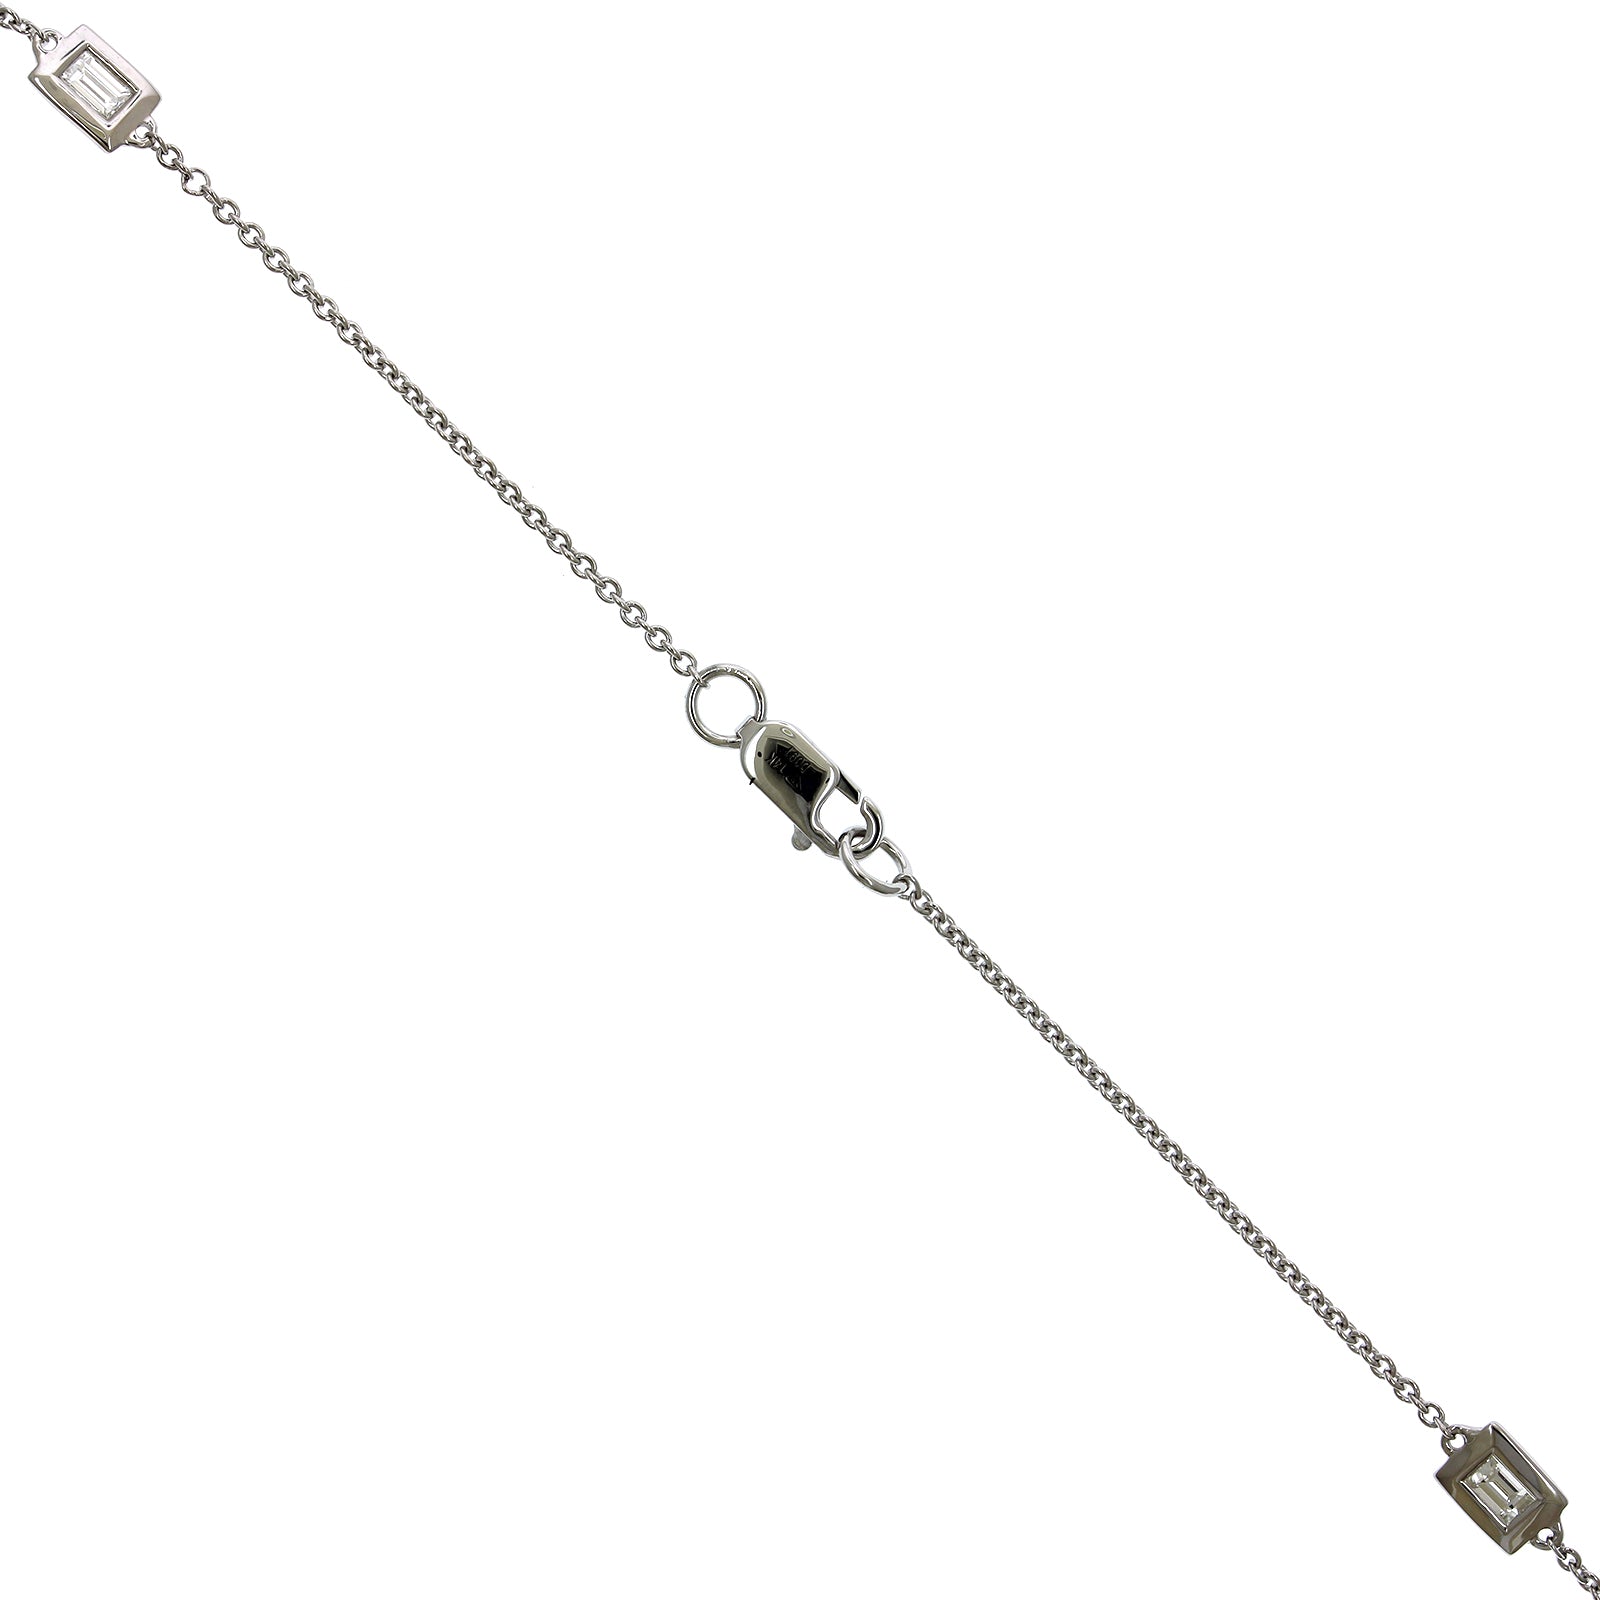 14K White Gold Baguette and Round Cut Diamond by The Yard Necklace